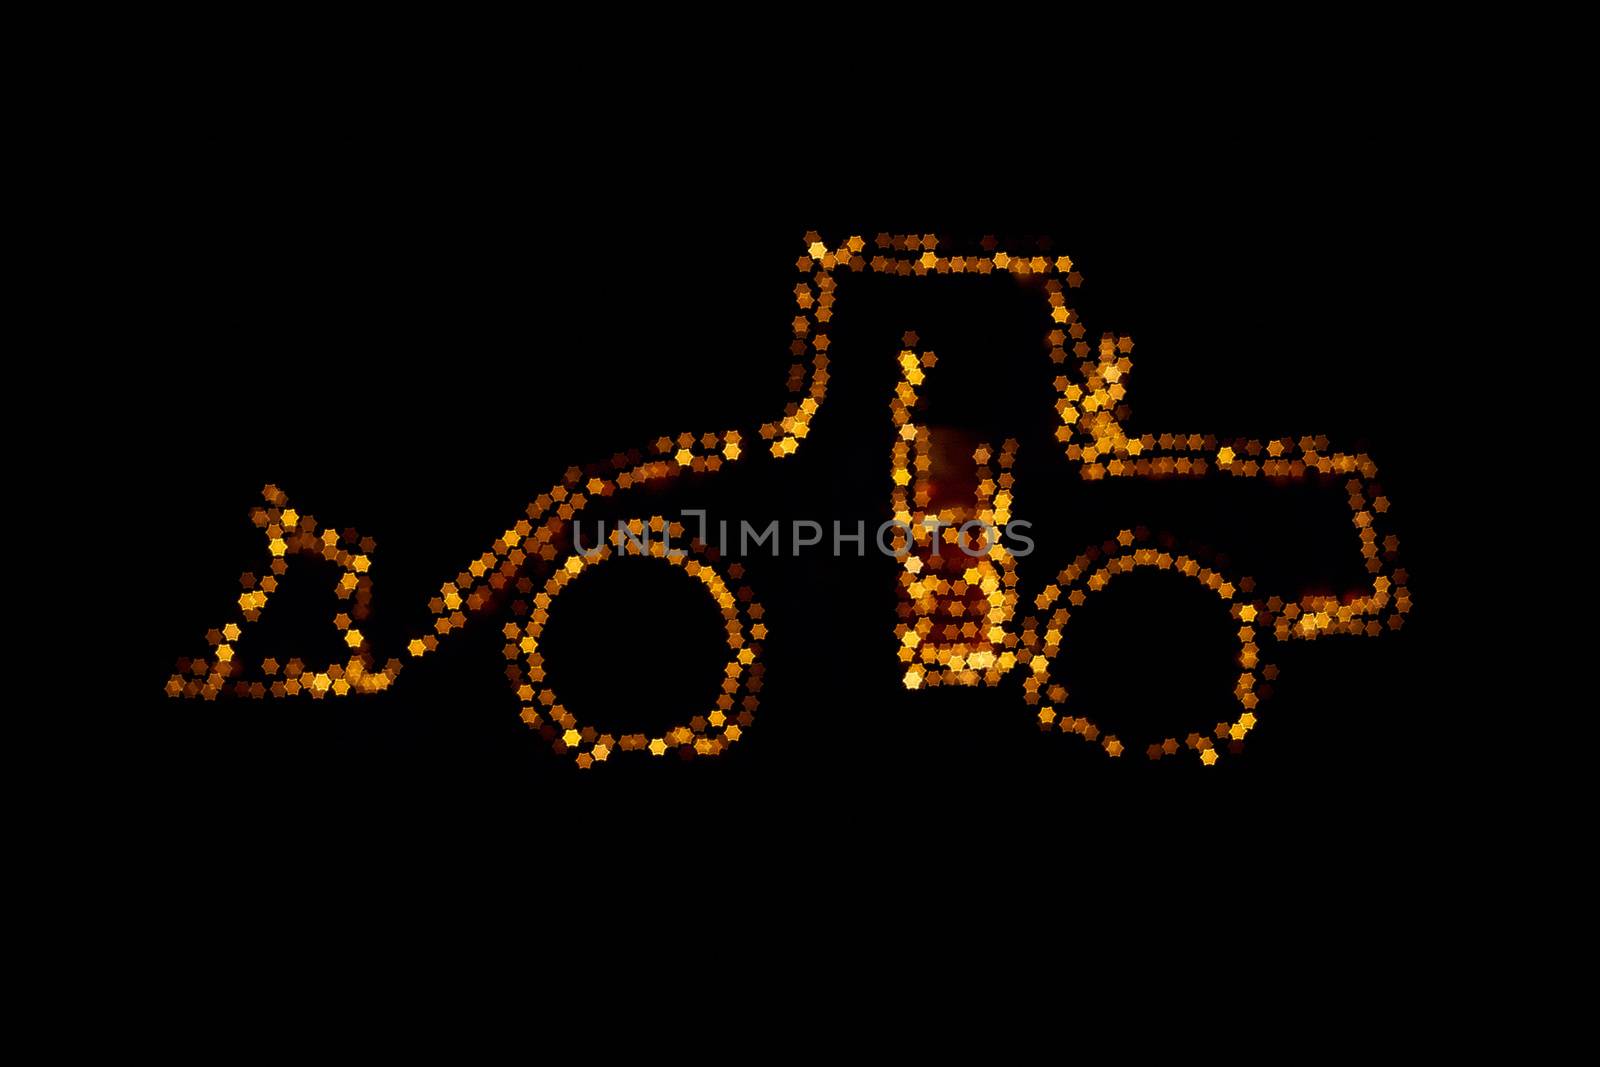 Blurred wheel loader decorated with lights by Sirius3001